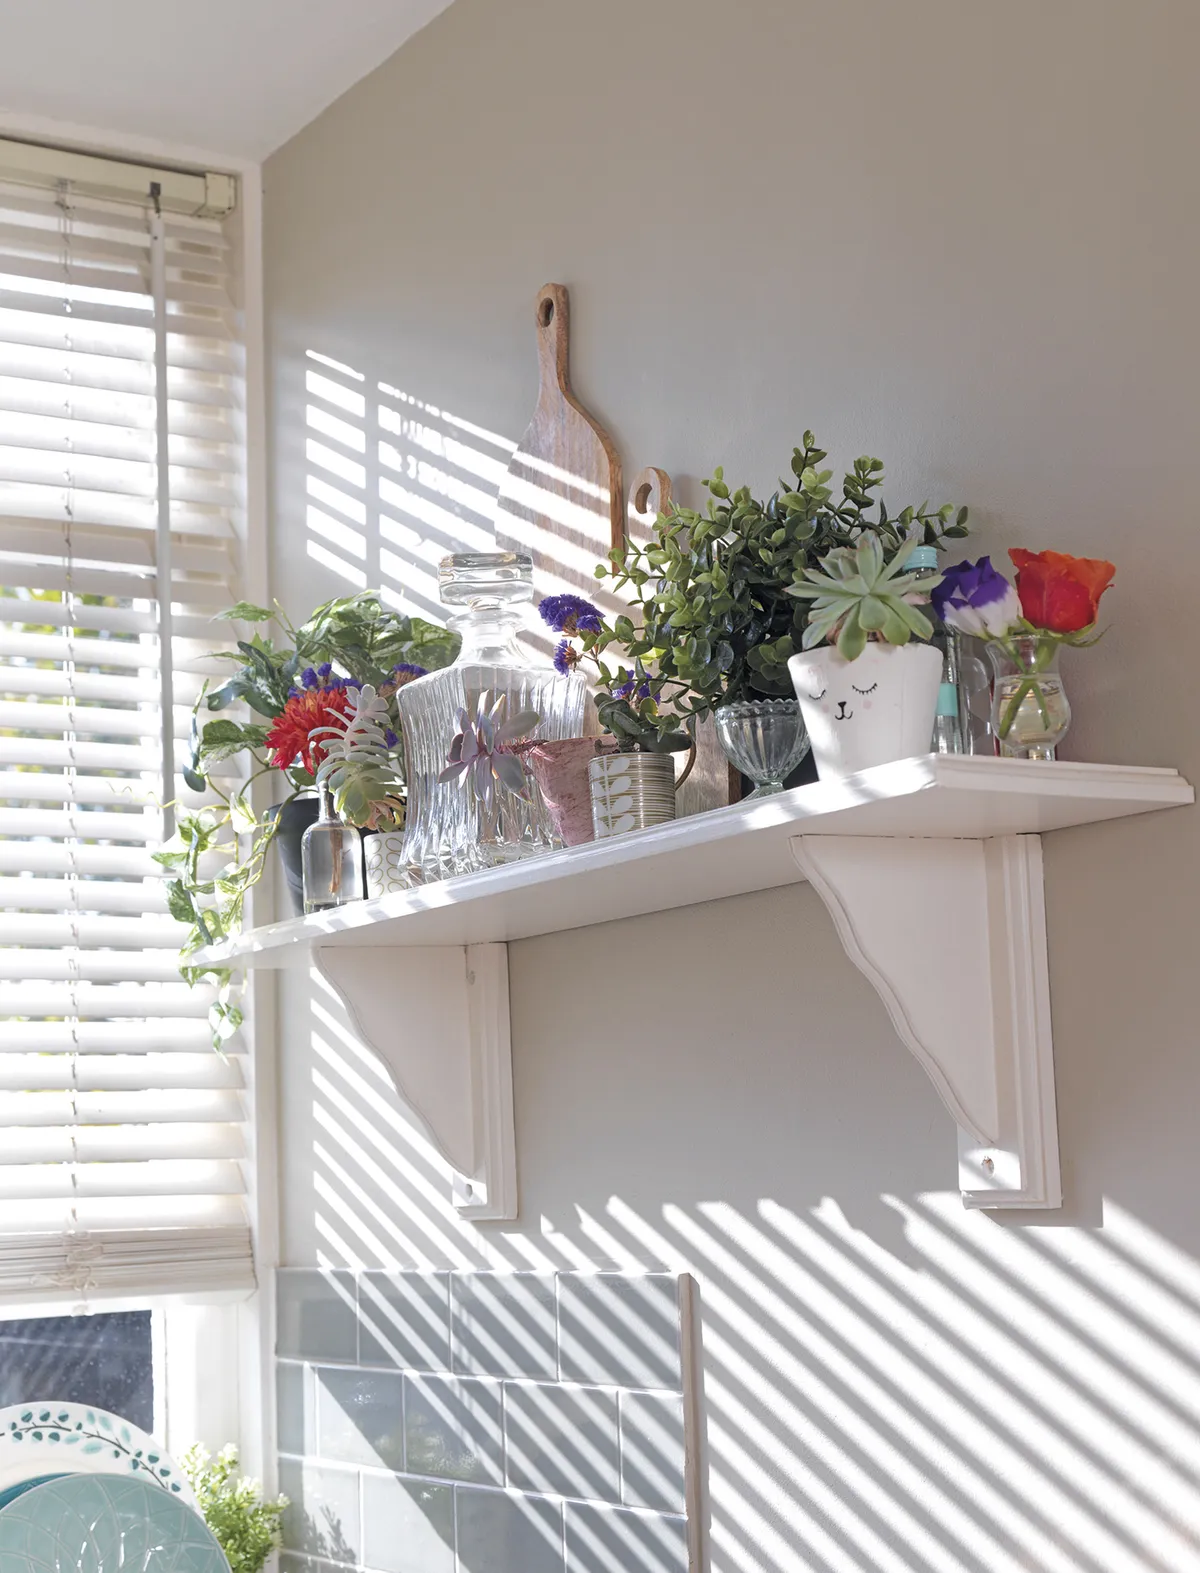 With a combination of chopping boards and glassware, interspersed with succulents, little posies and artificial plants, the shelf above the sink is cleverly arranged, without looking too cluttered